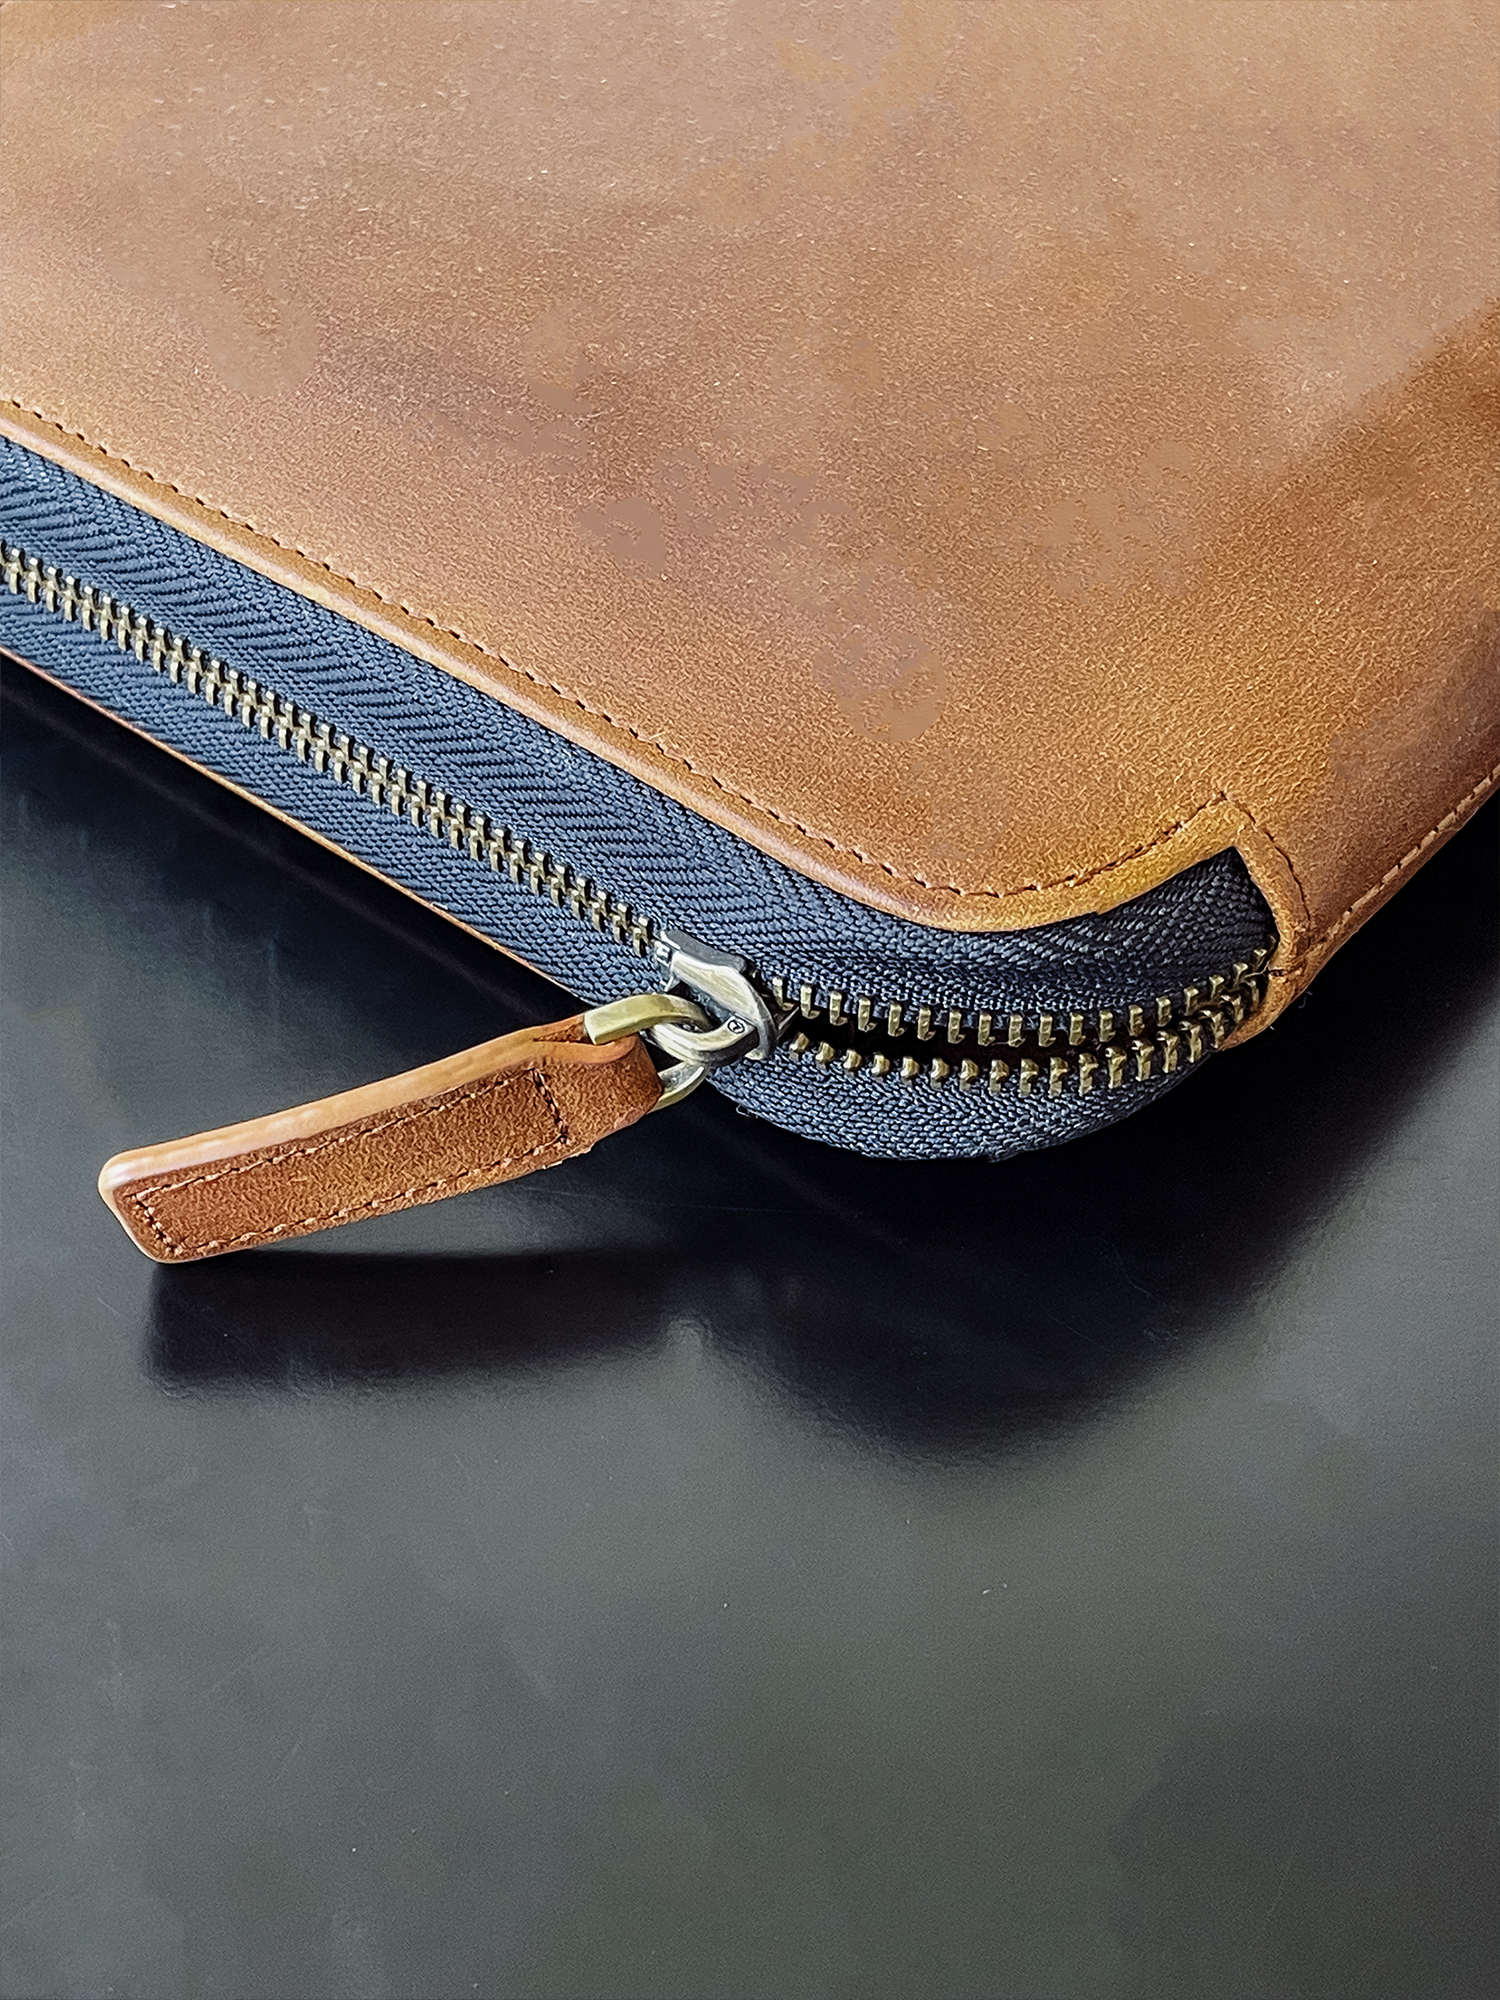 Close-up of a brown leather bag with a zipper on a dark surface.